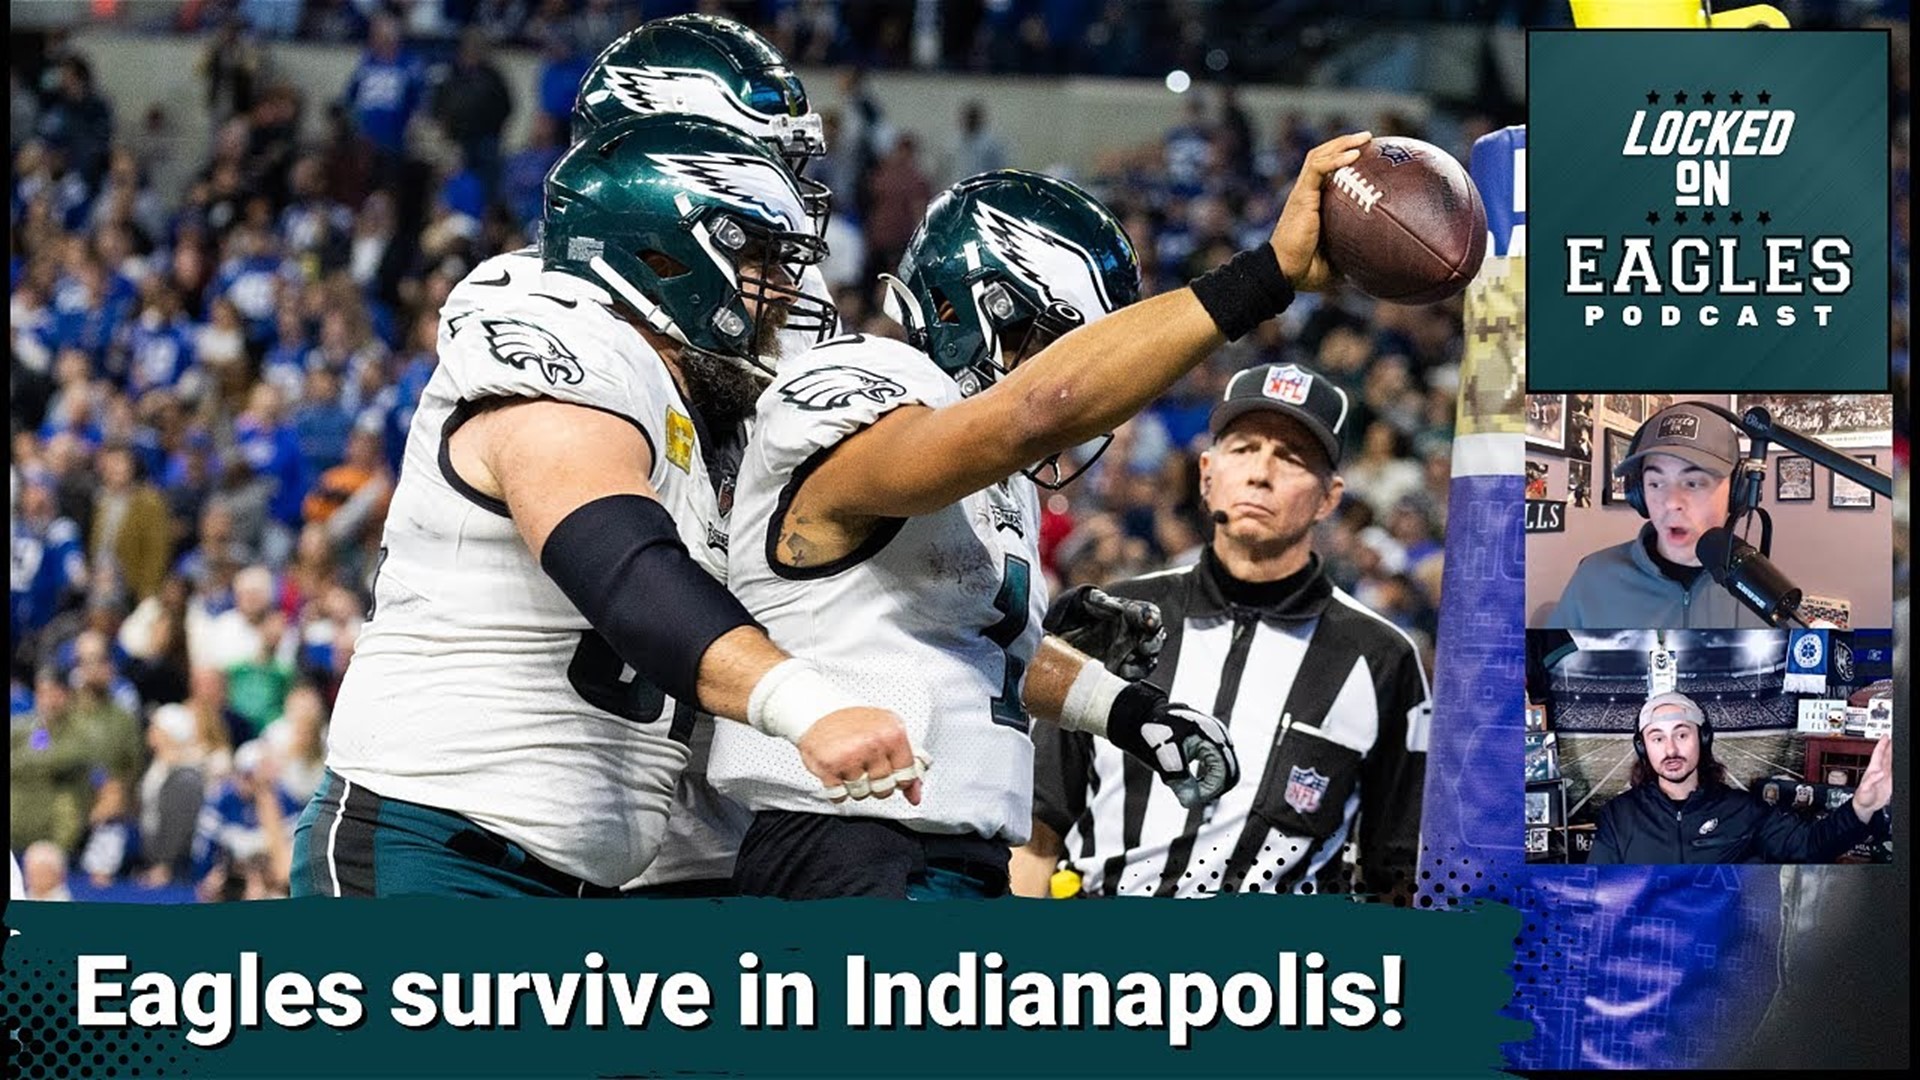 Philadelphia Eagles QB Jalen Hurts and the entire defense stepped up when it mattered most to get a come from behind 17-16 victory over the Indianapolis Colts.